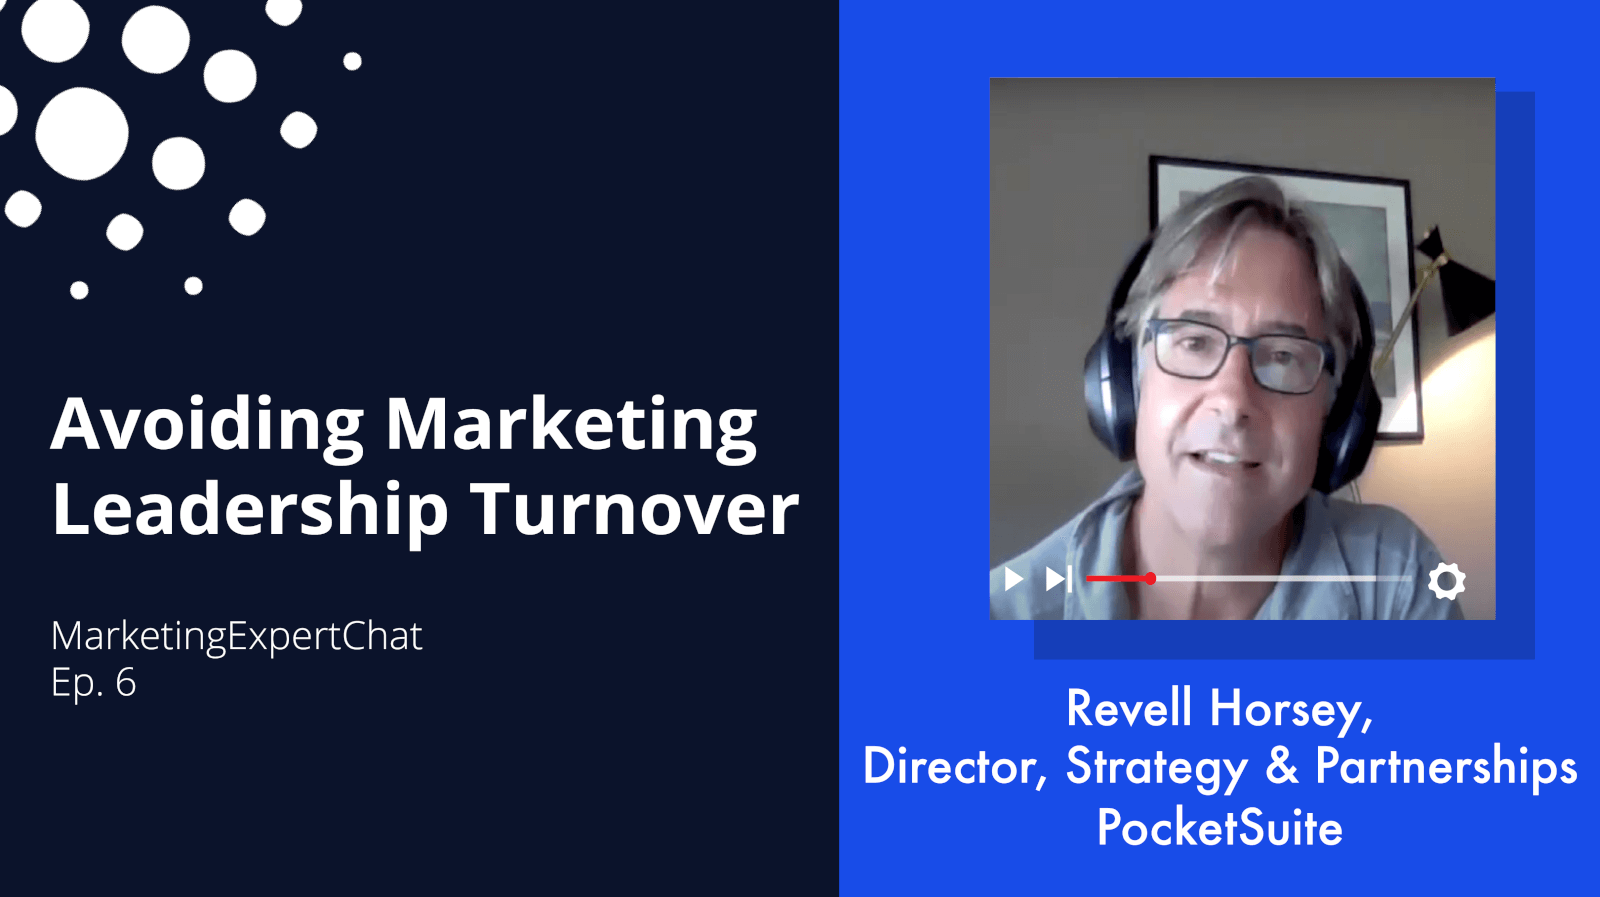 Want To Decrease Turnover on Your Marketing Team?